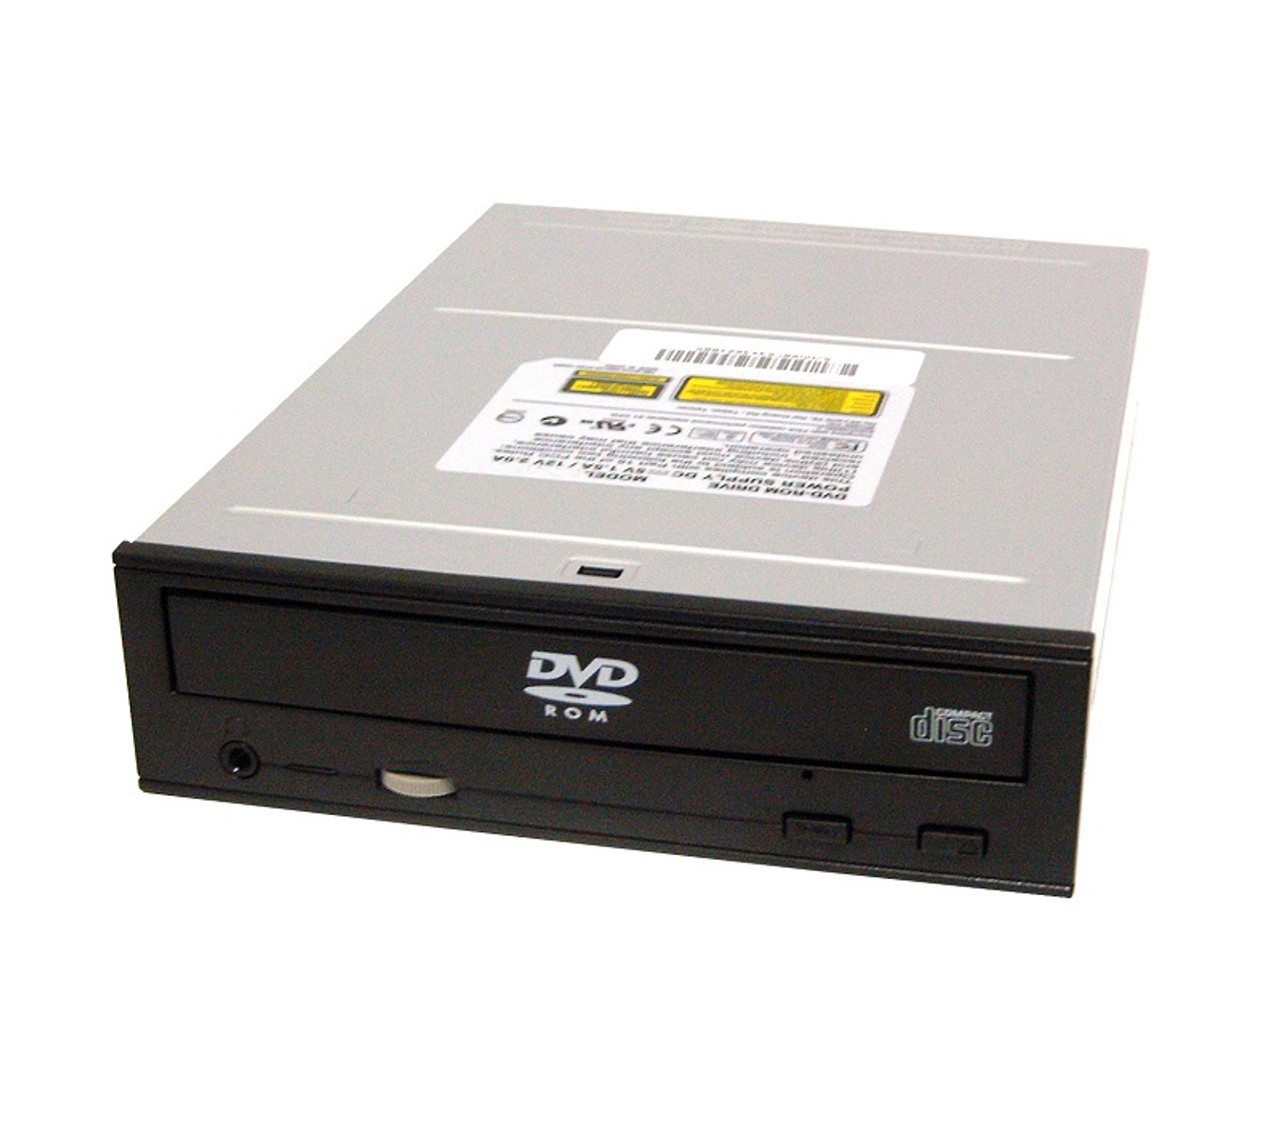 5W299-A01 - Dell DVD-ROM Drive Gray for Latitude D630 D520 D820 D620